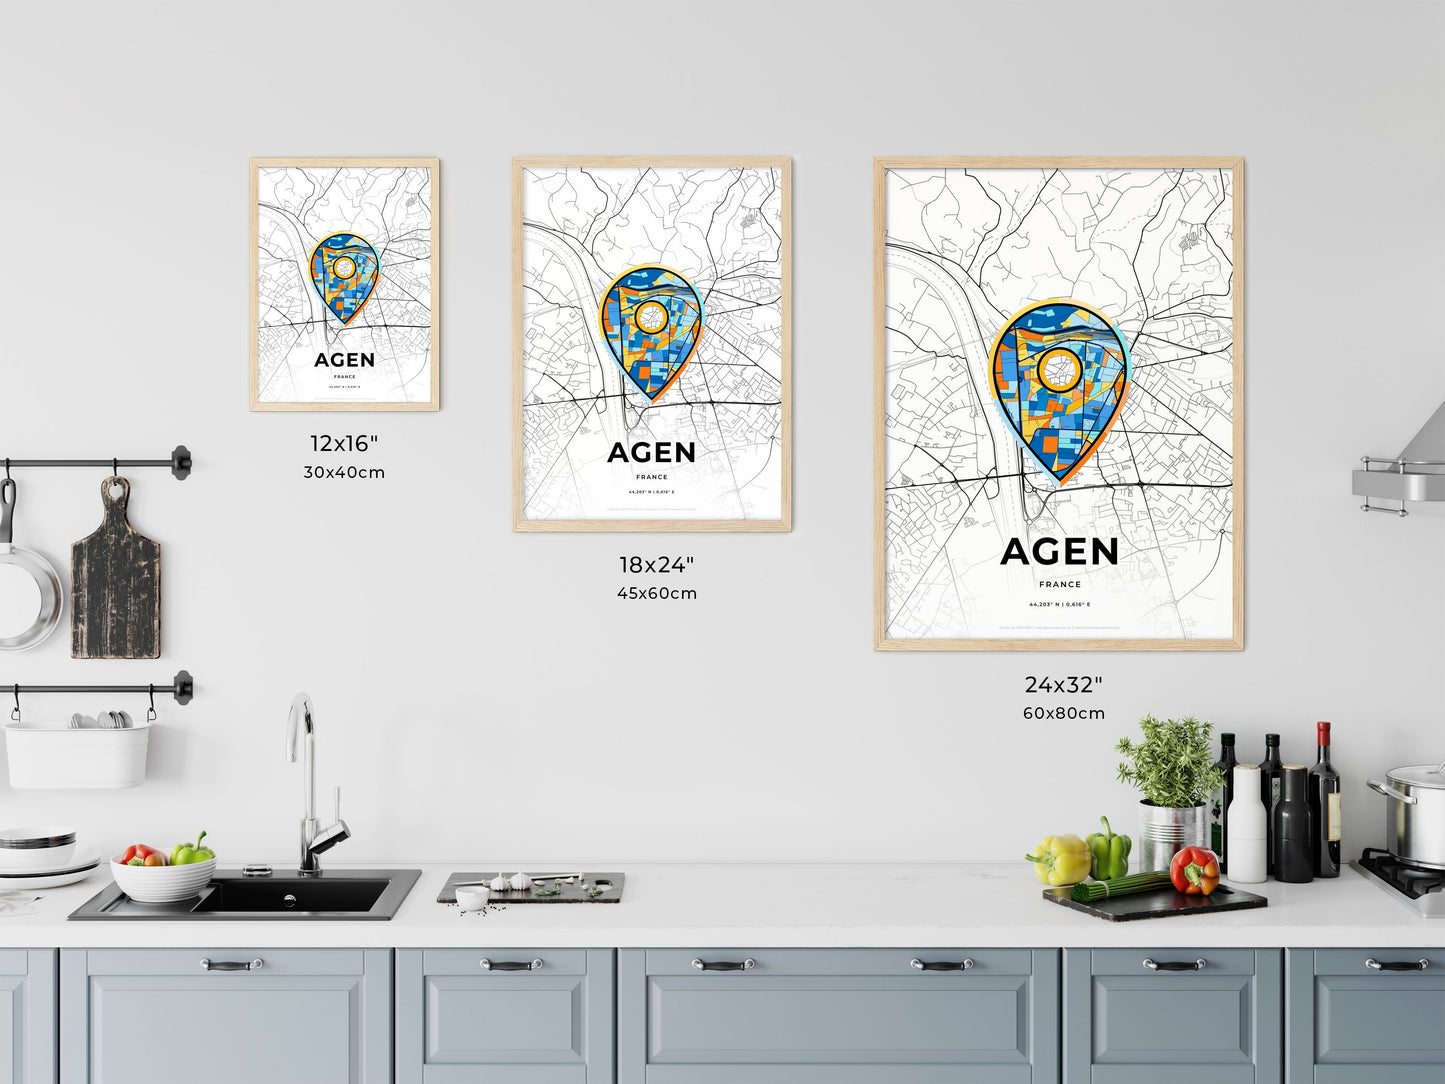 AGEN FRANCE minimal art map with a colorful icon. Where it all began, Couple map gift.